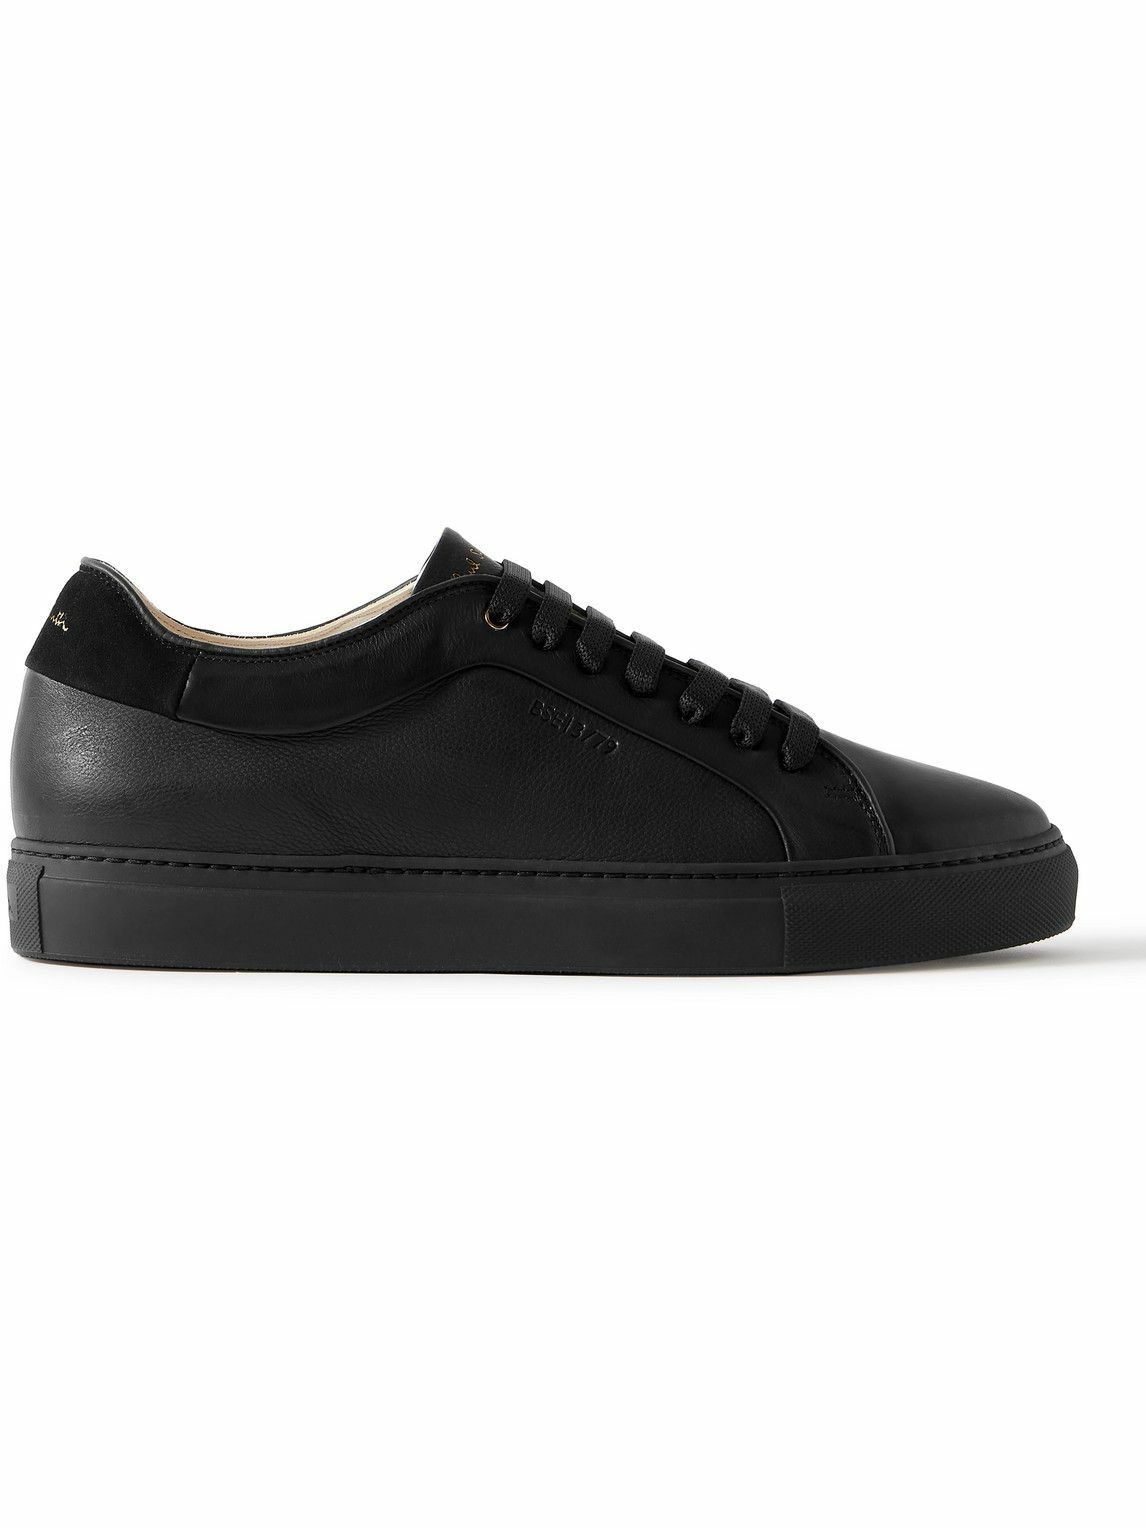 Paul Smith - Basso Suede-Trimmed ECO Leather Sneakers - Black Paul Smith